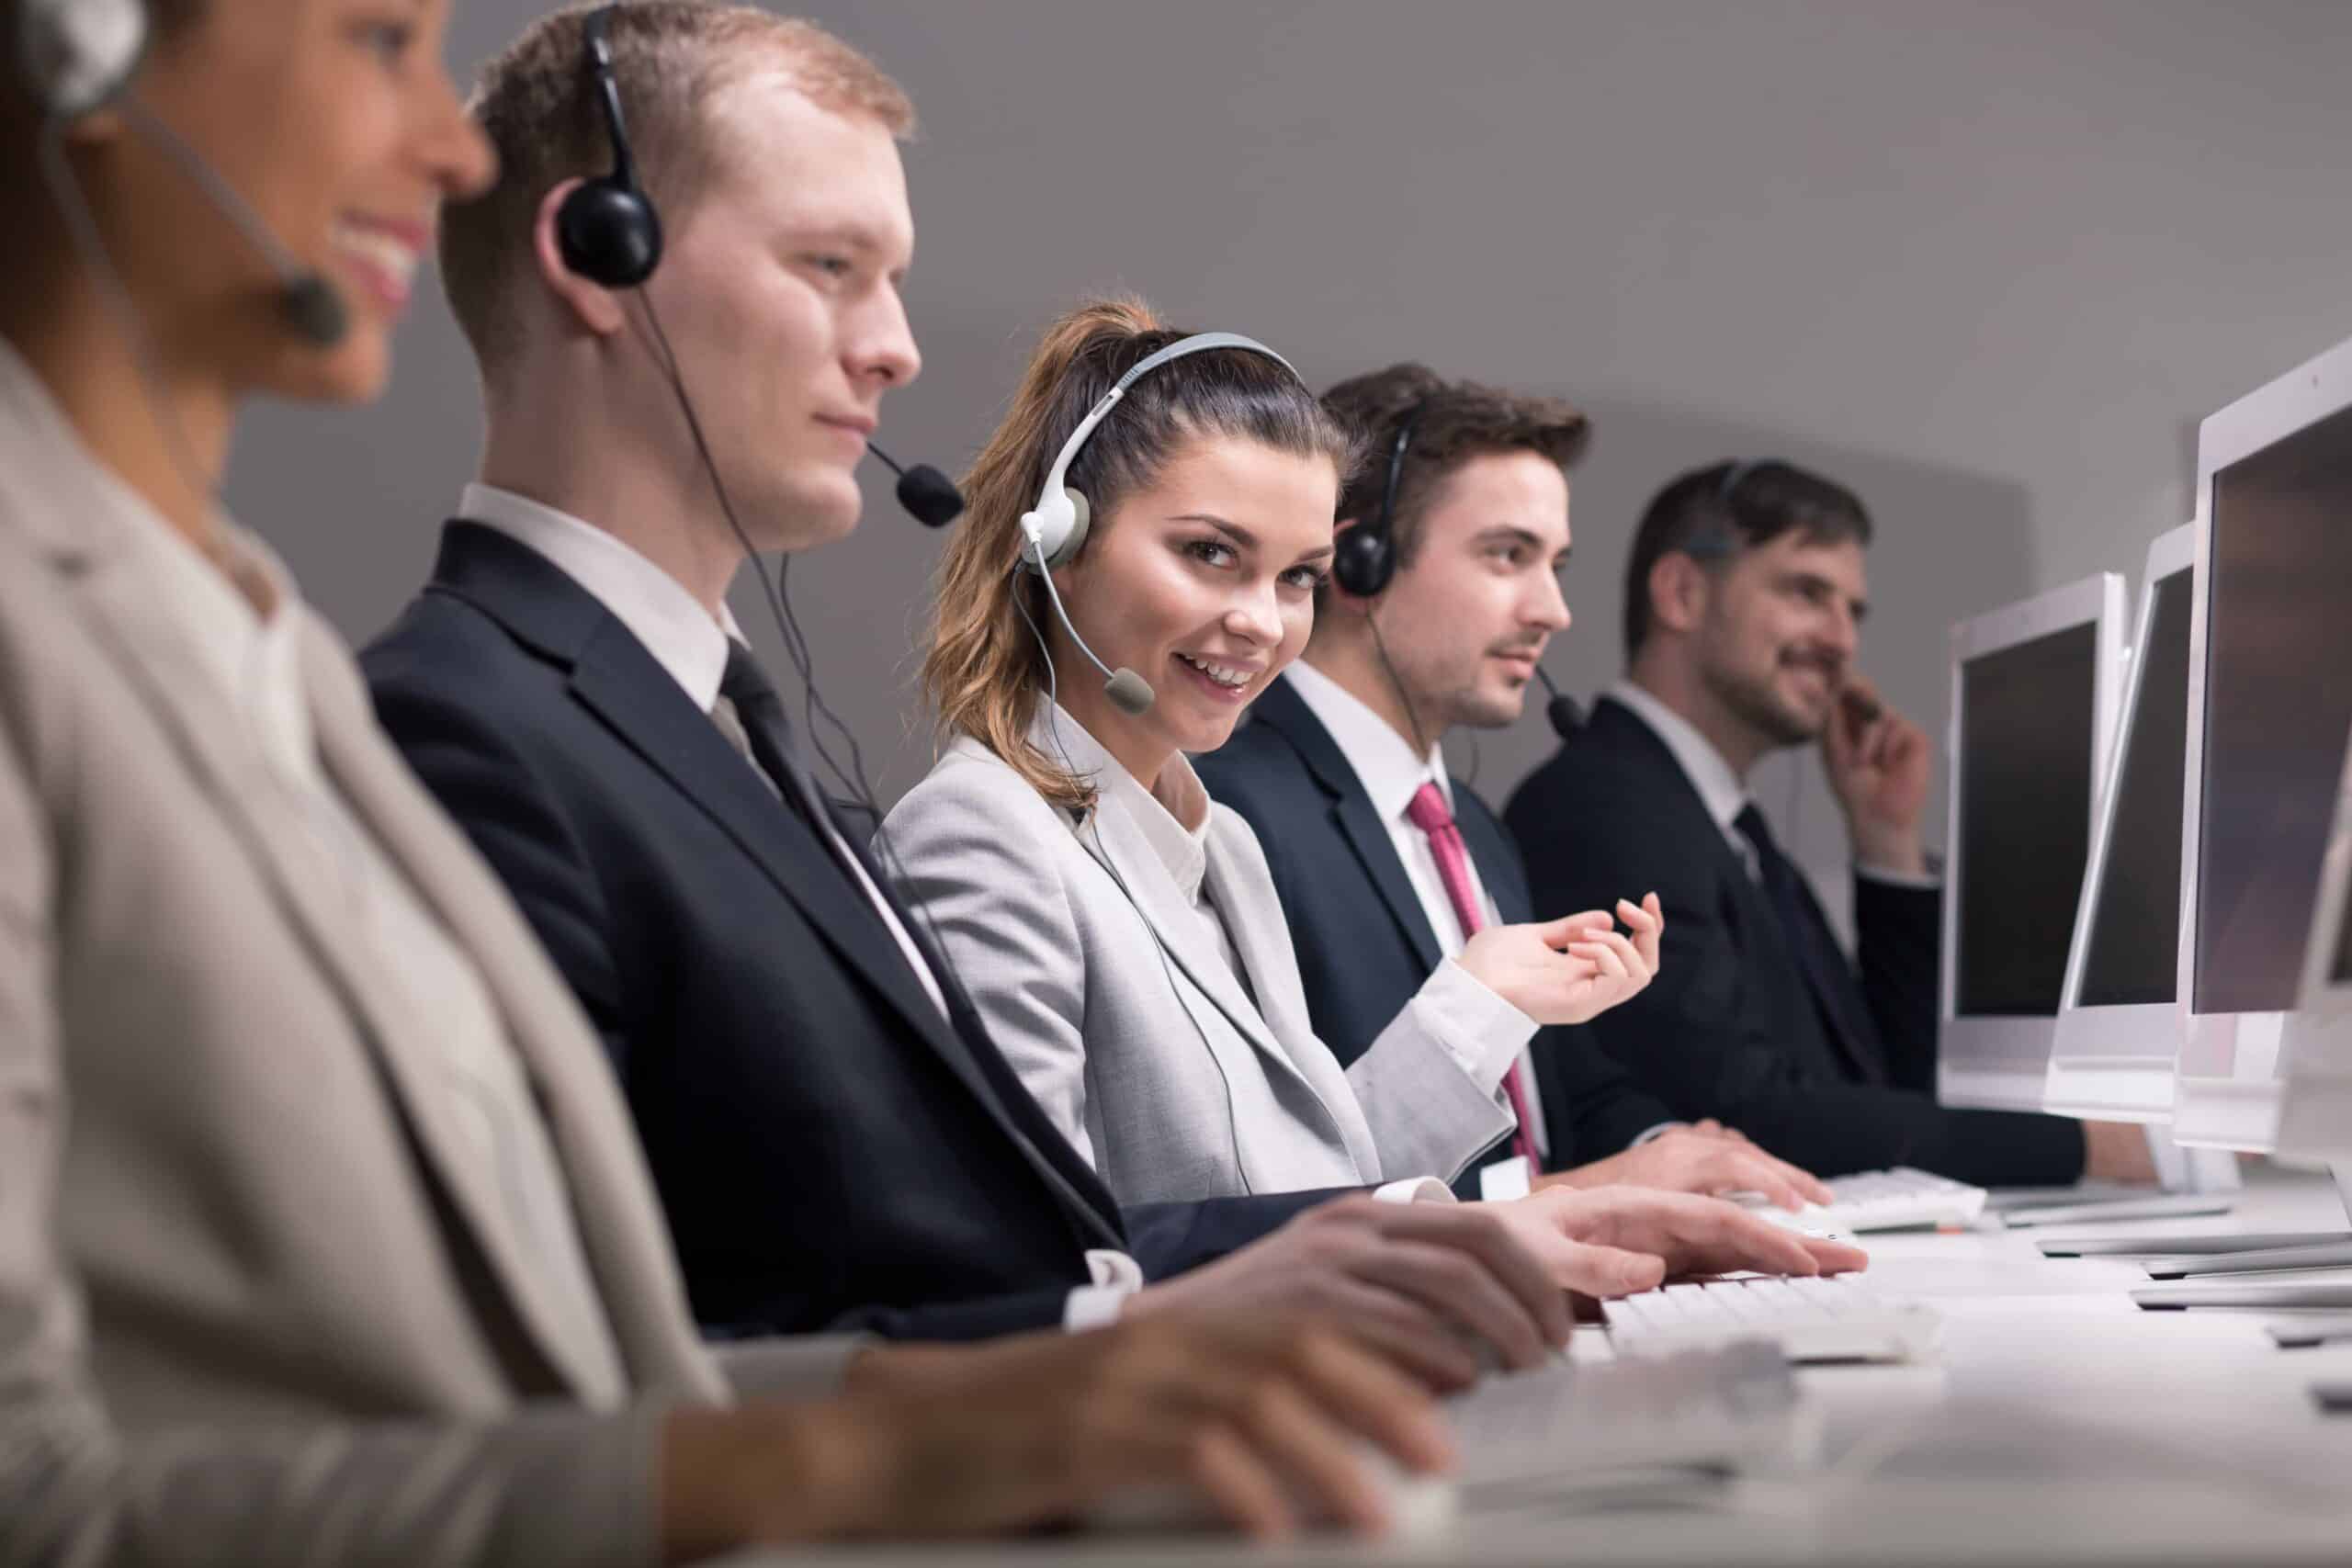 5 Steps to Building an Omnichannel Contact Center